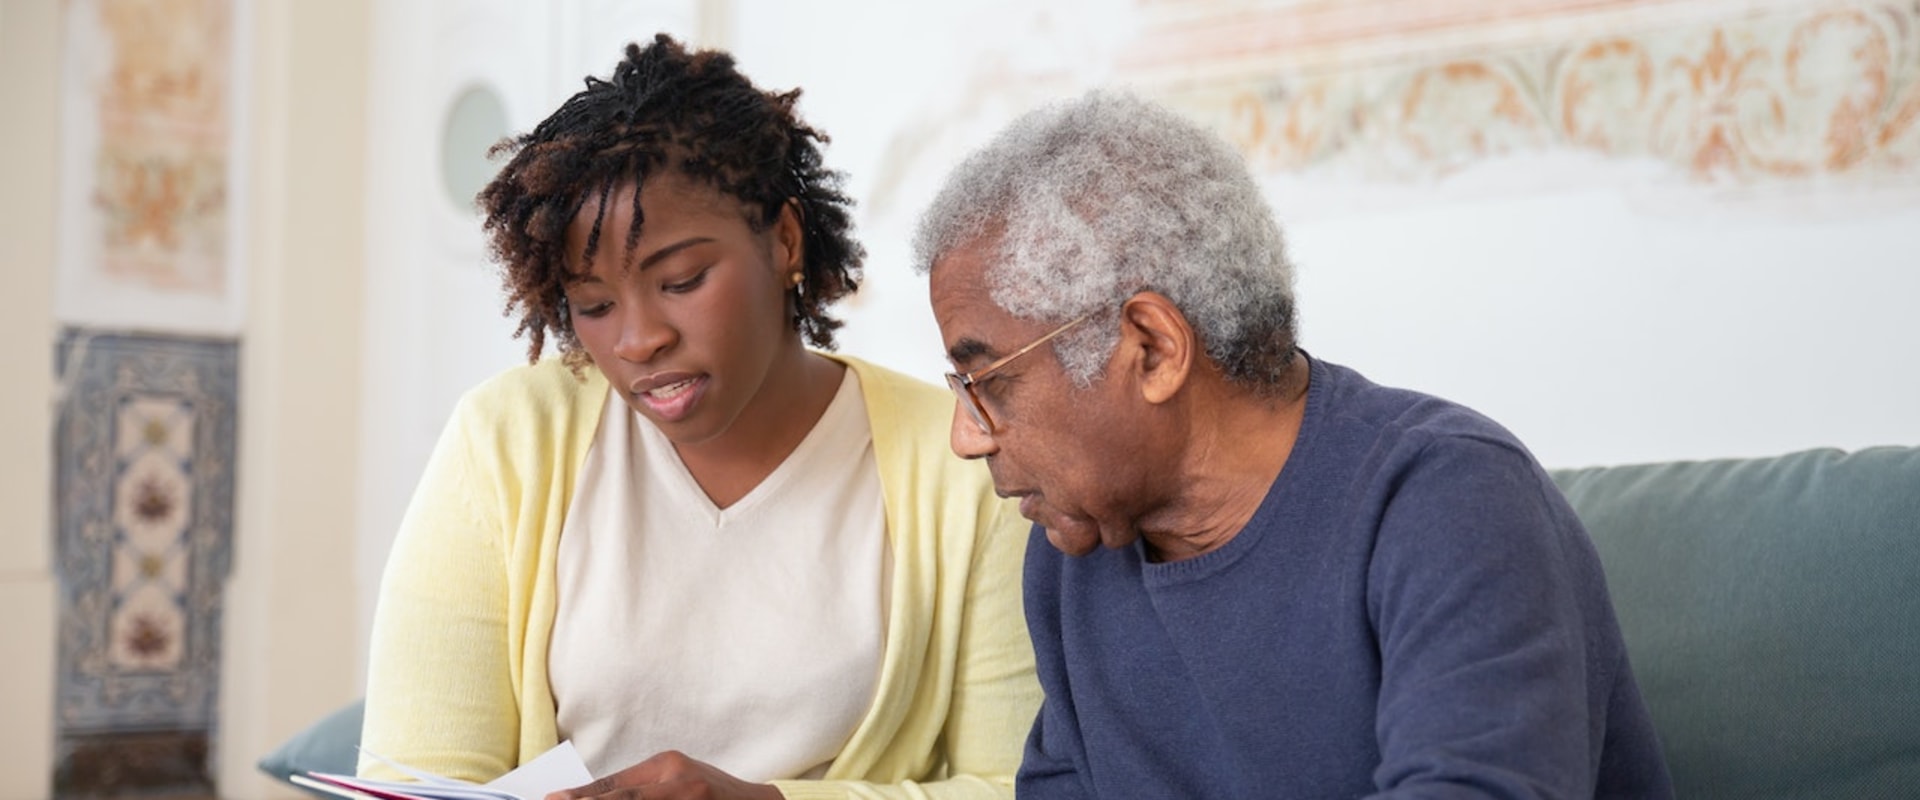 Comprehensive Medical Care for Seniors: What Options Are Available?